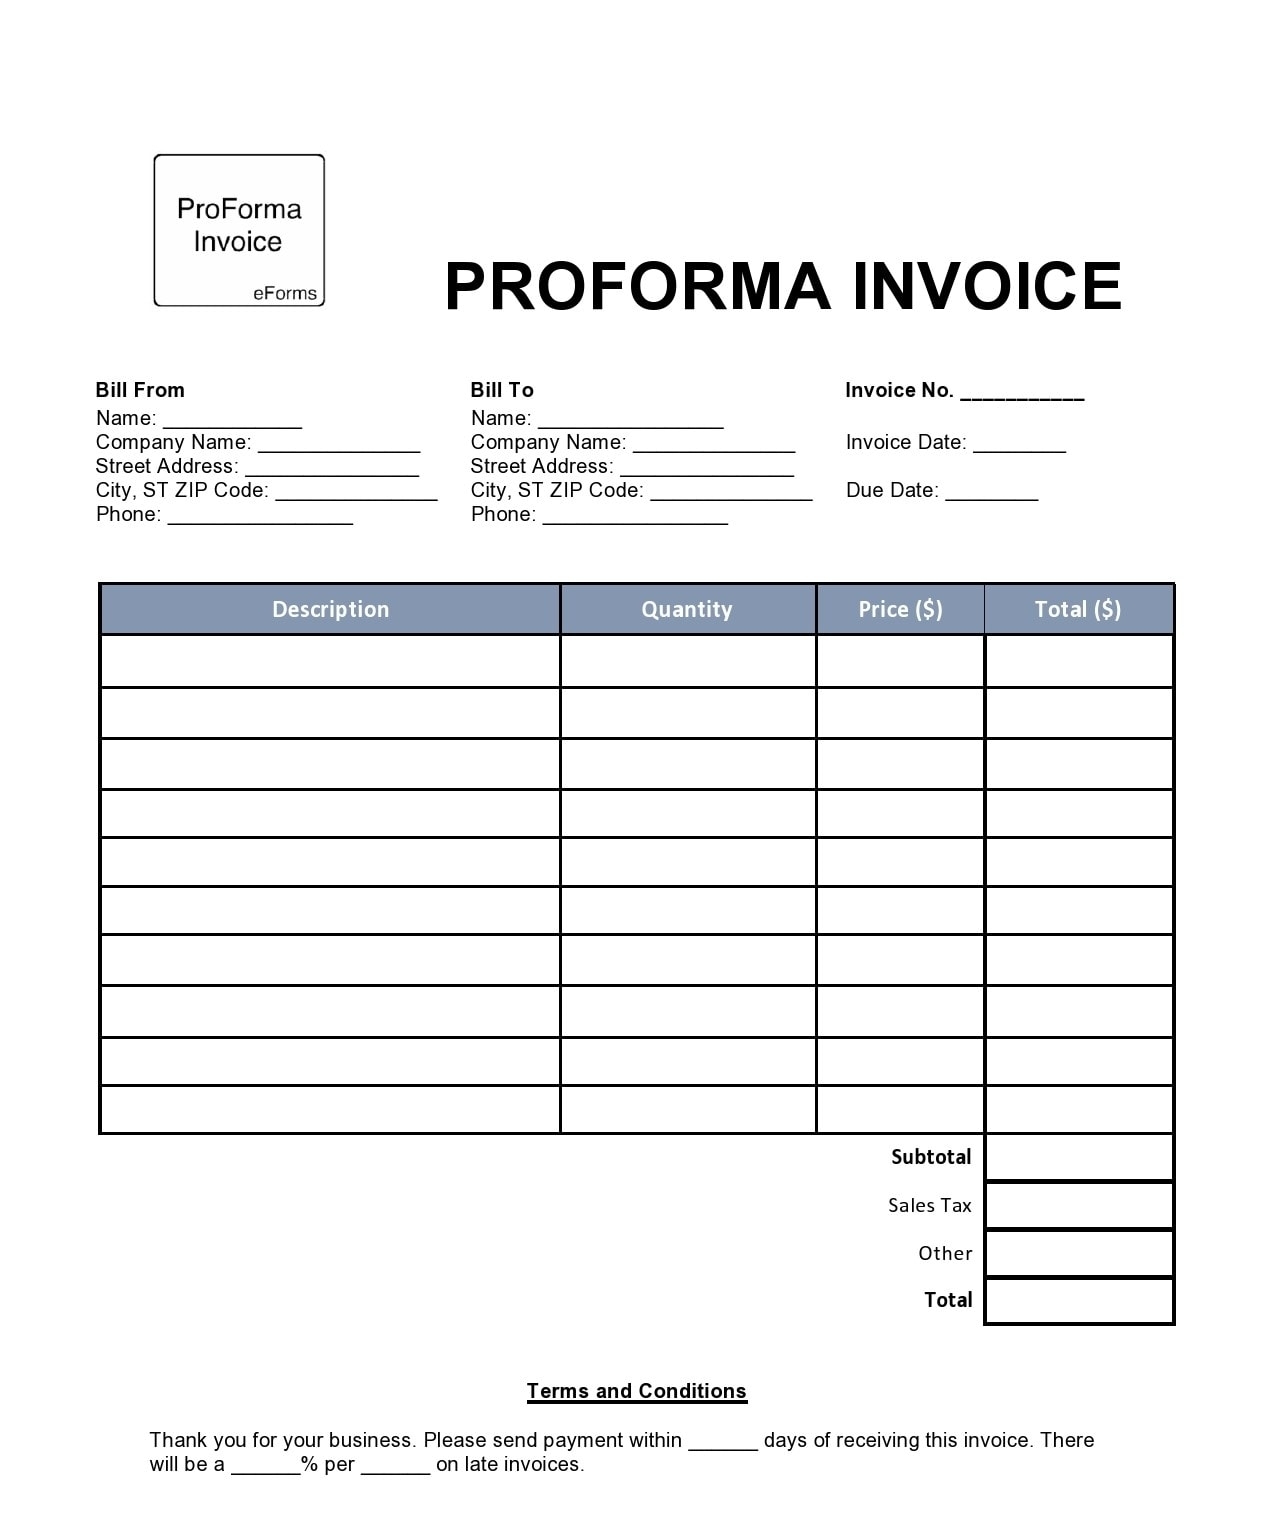 30 Free Proforma Invoice Templates [Excel, Word, Pdf] - Templatearchive Intended For Free Proforma Invoice Template Word